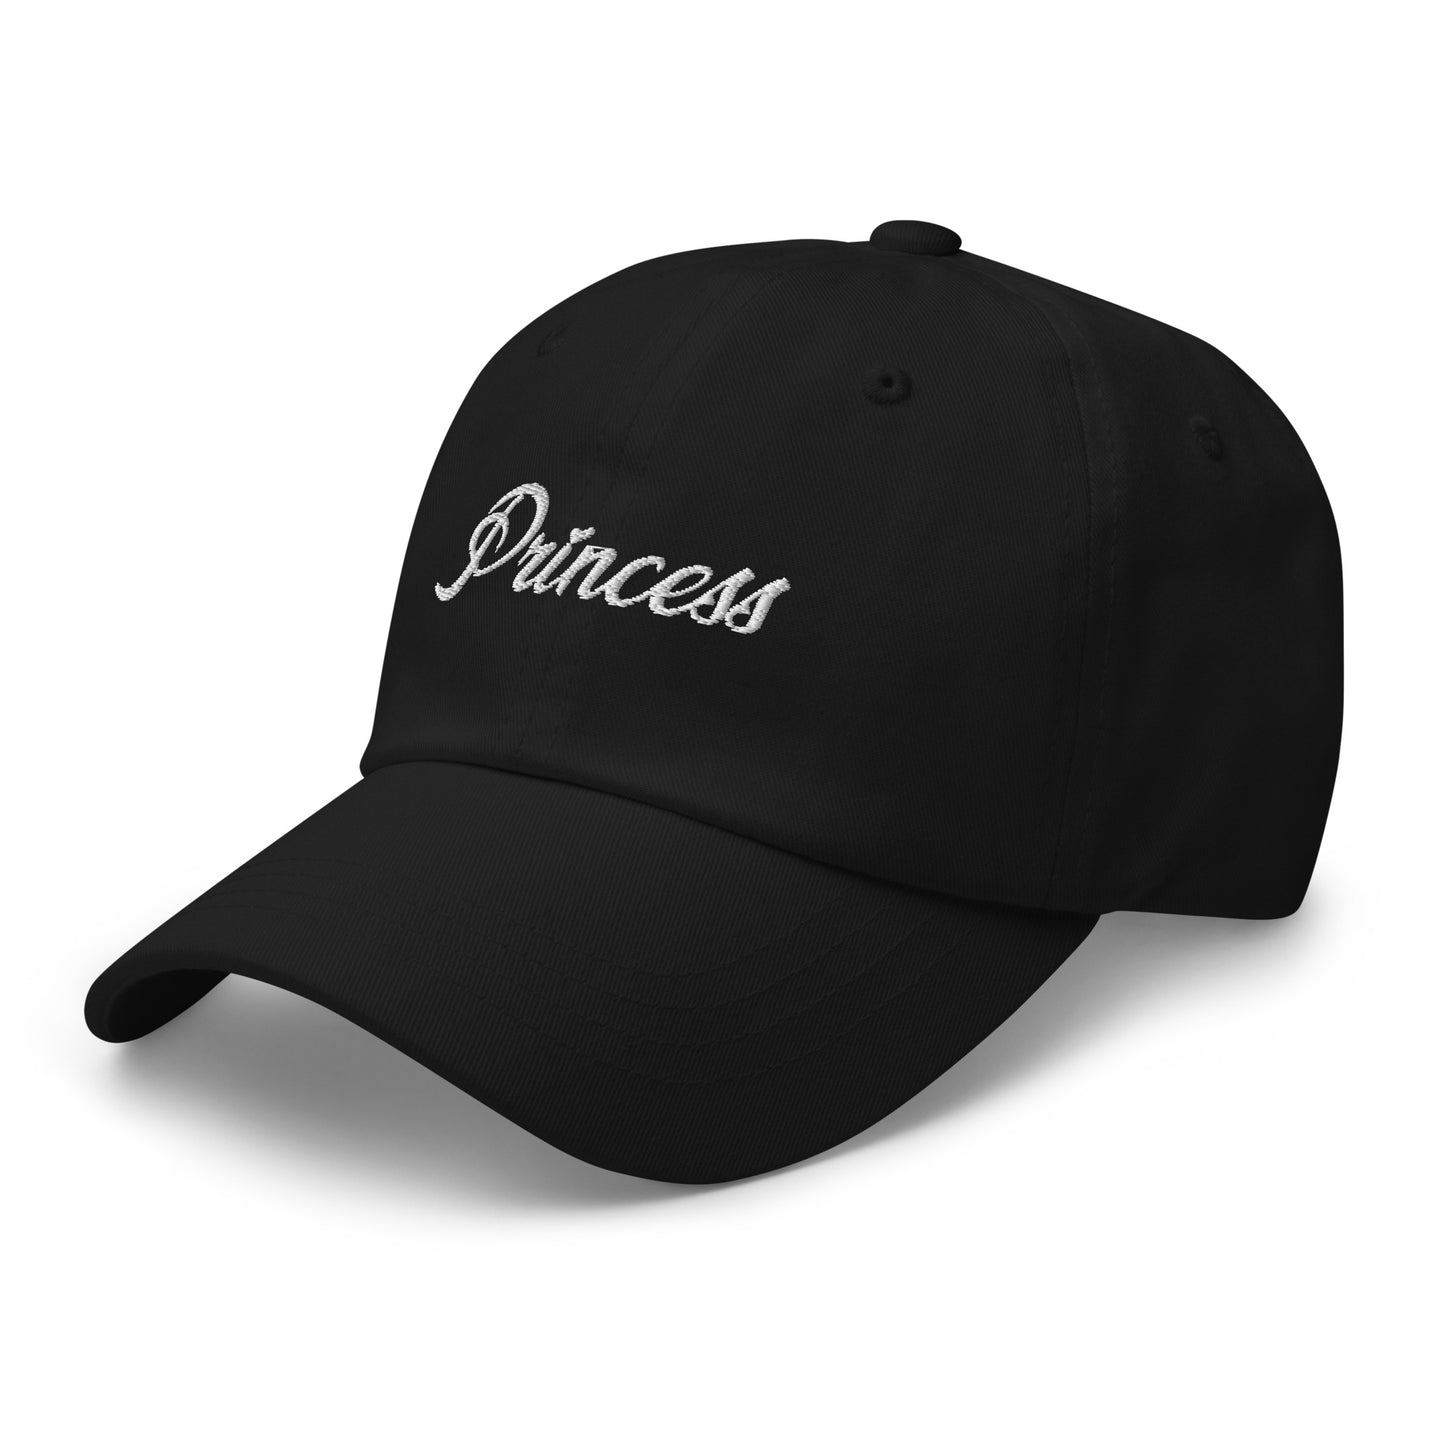 Personal Foul Nickname Dad hat